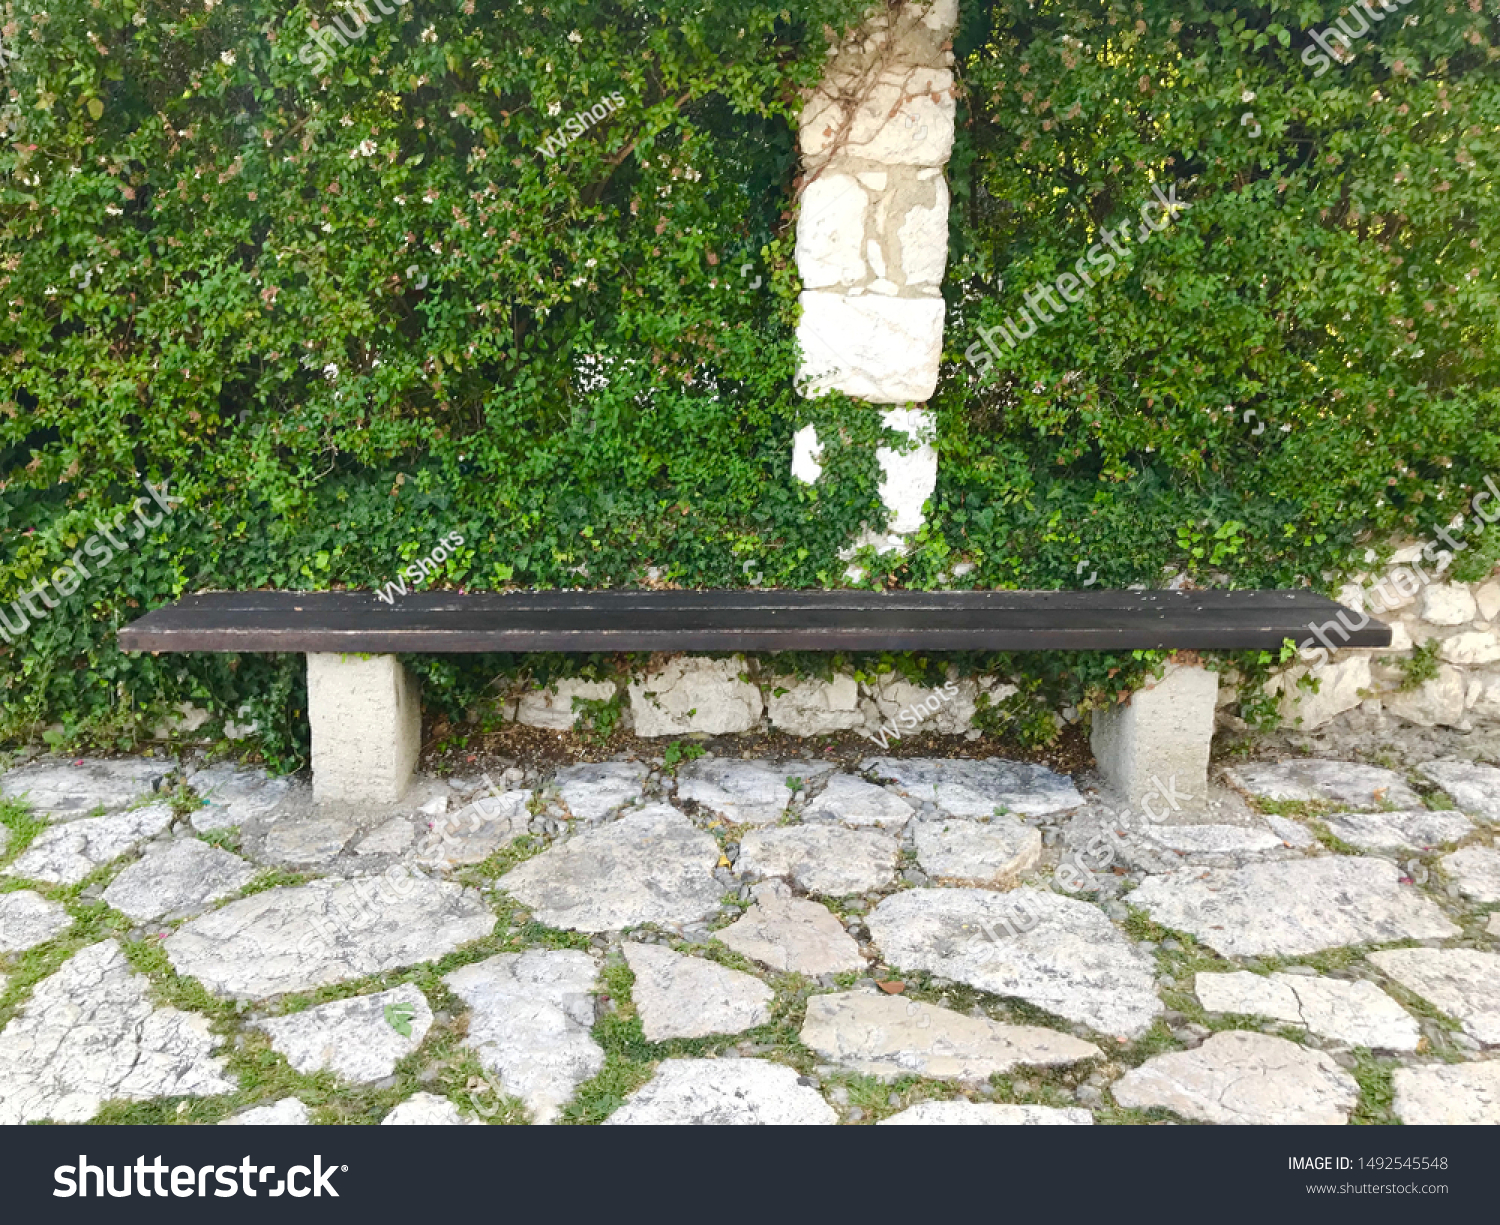 Park bench stone floor and wall leaves foliage tranquil scene #1492545548